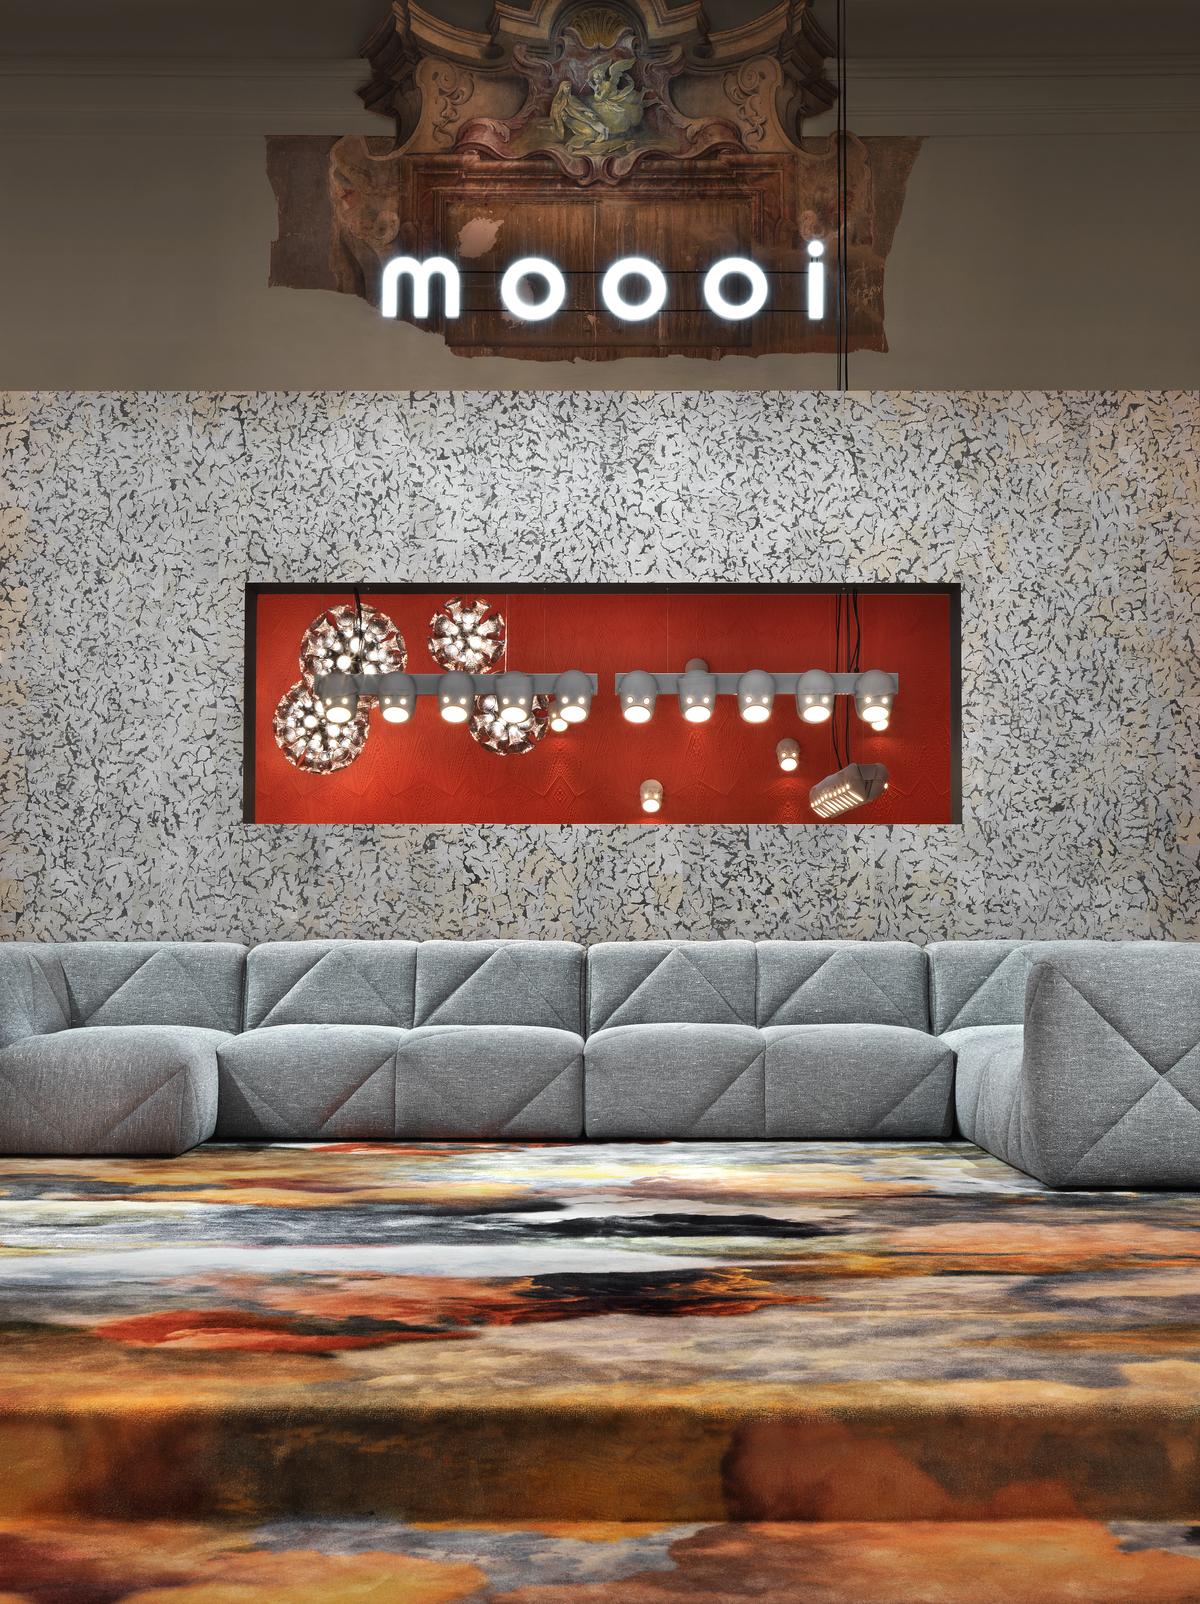 Moooi BFF Right Arm Chaise Longue Sofa in Justo, Bazalt Upholstery In New Condition For Sale In Brooklyn, NY